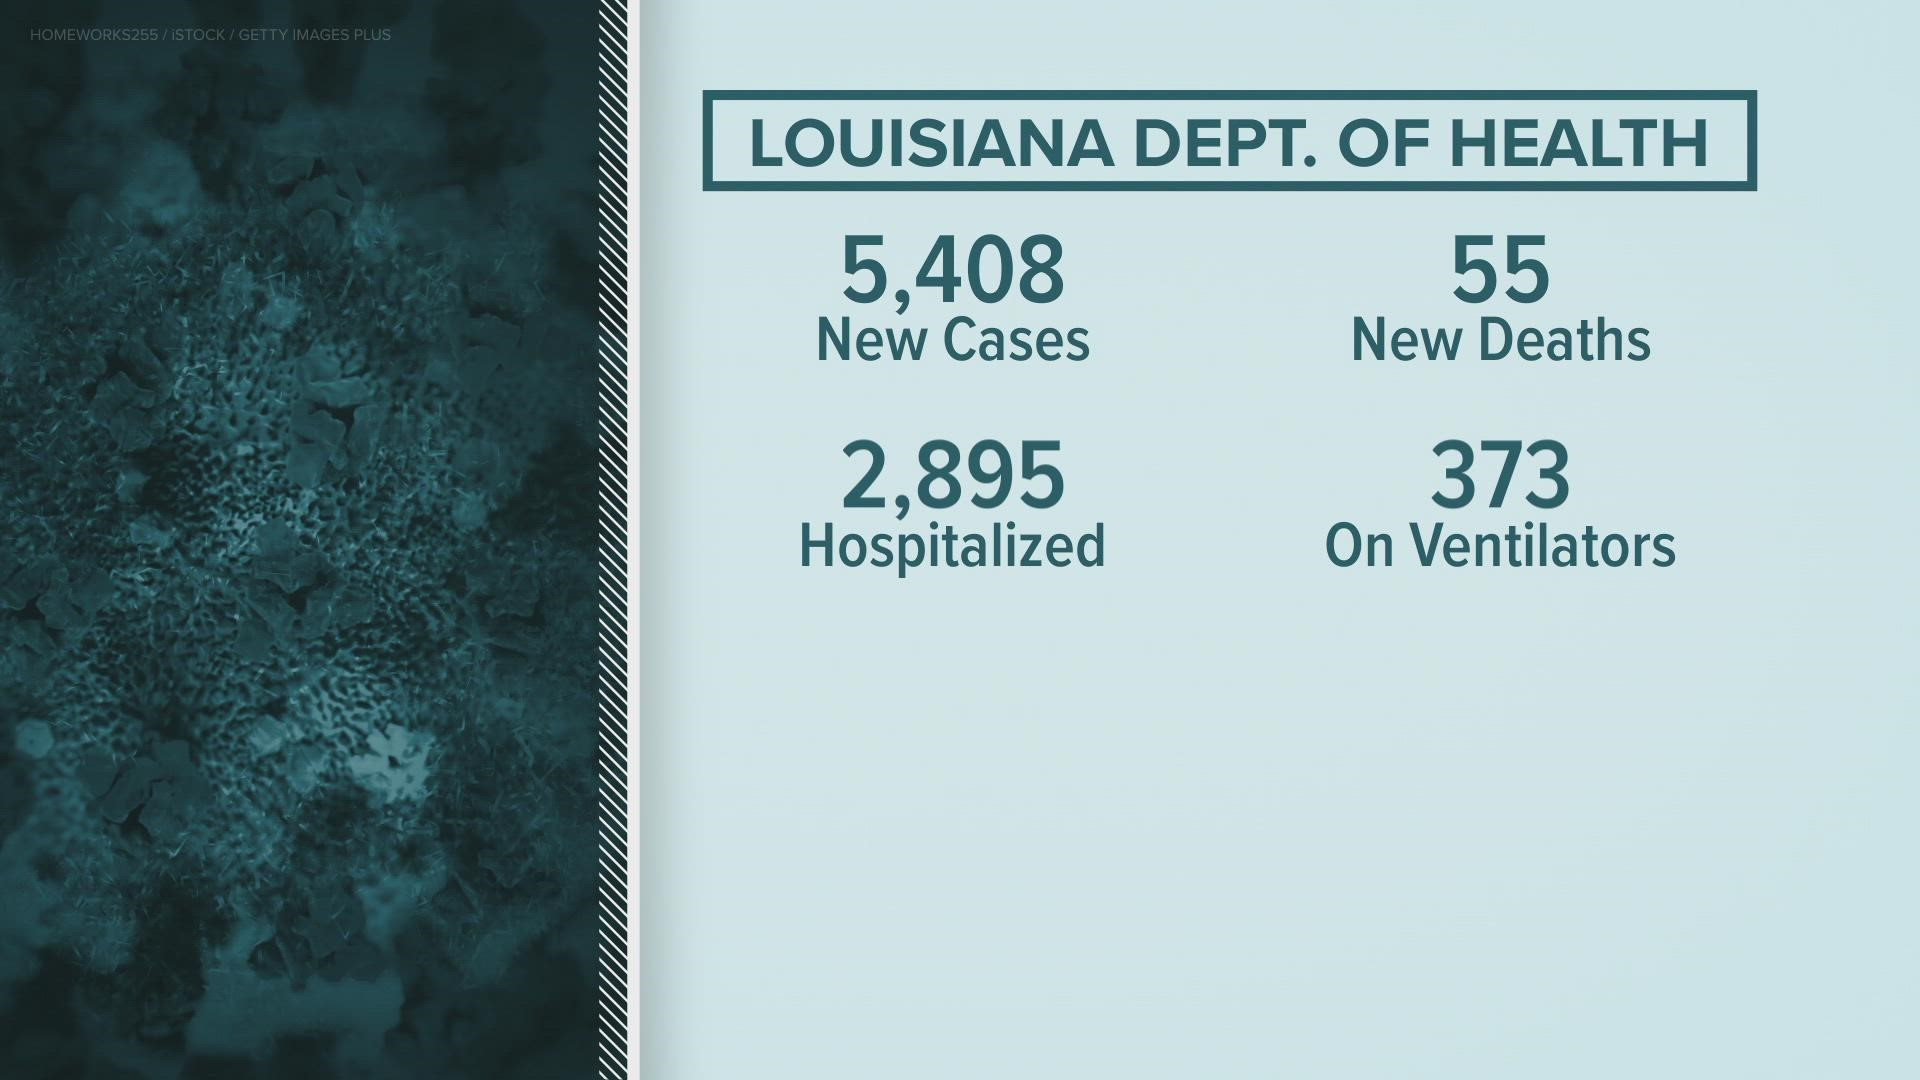 Hospitalizations continue to rise across the state, nearing 3,000 patients.